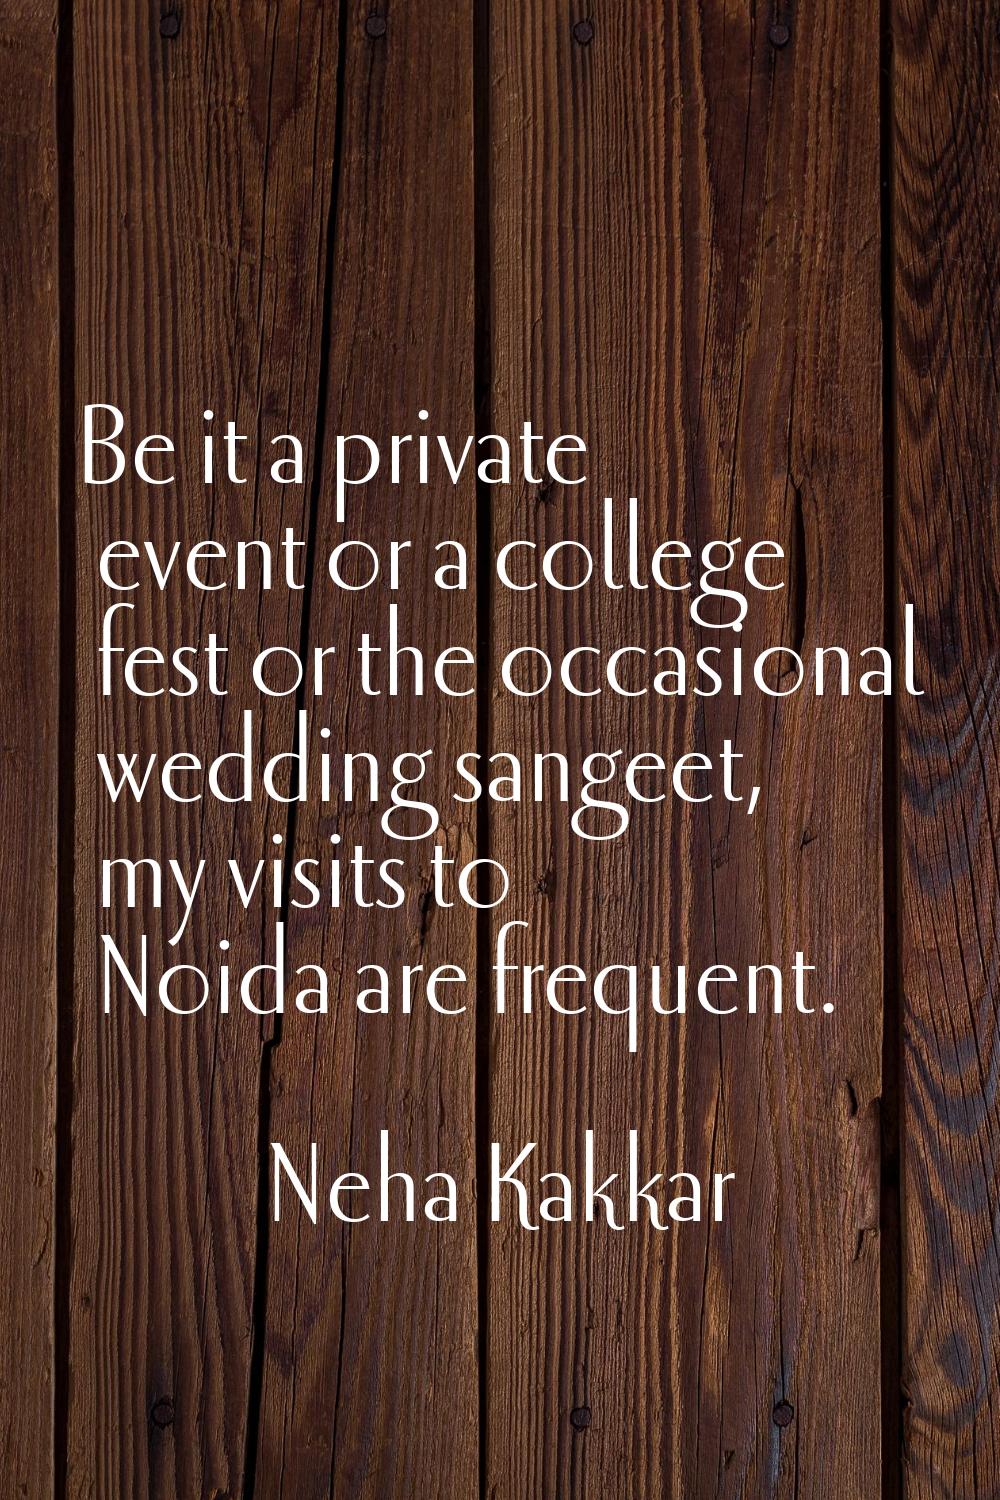 Be it a private event or a college fest or the occasional wedding sangeet, my visits to Noida are f